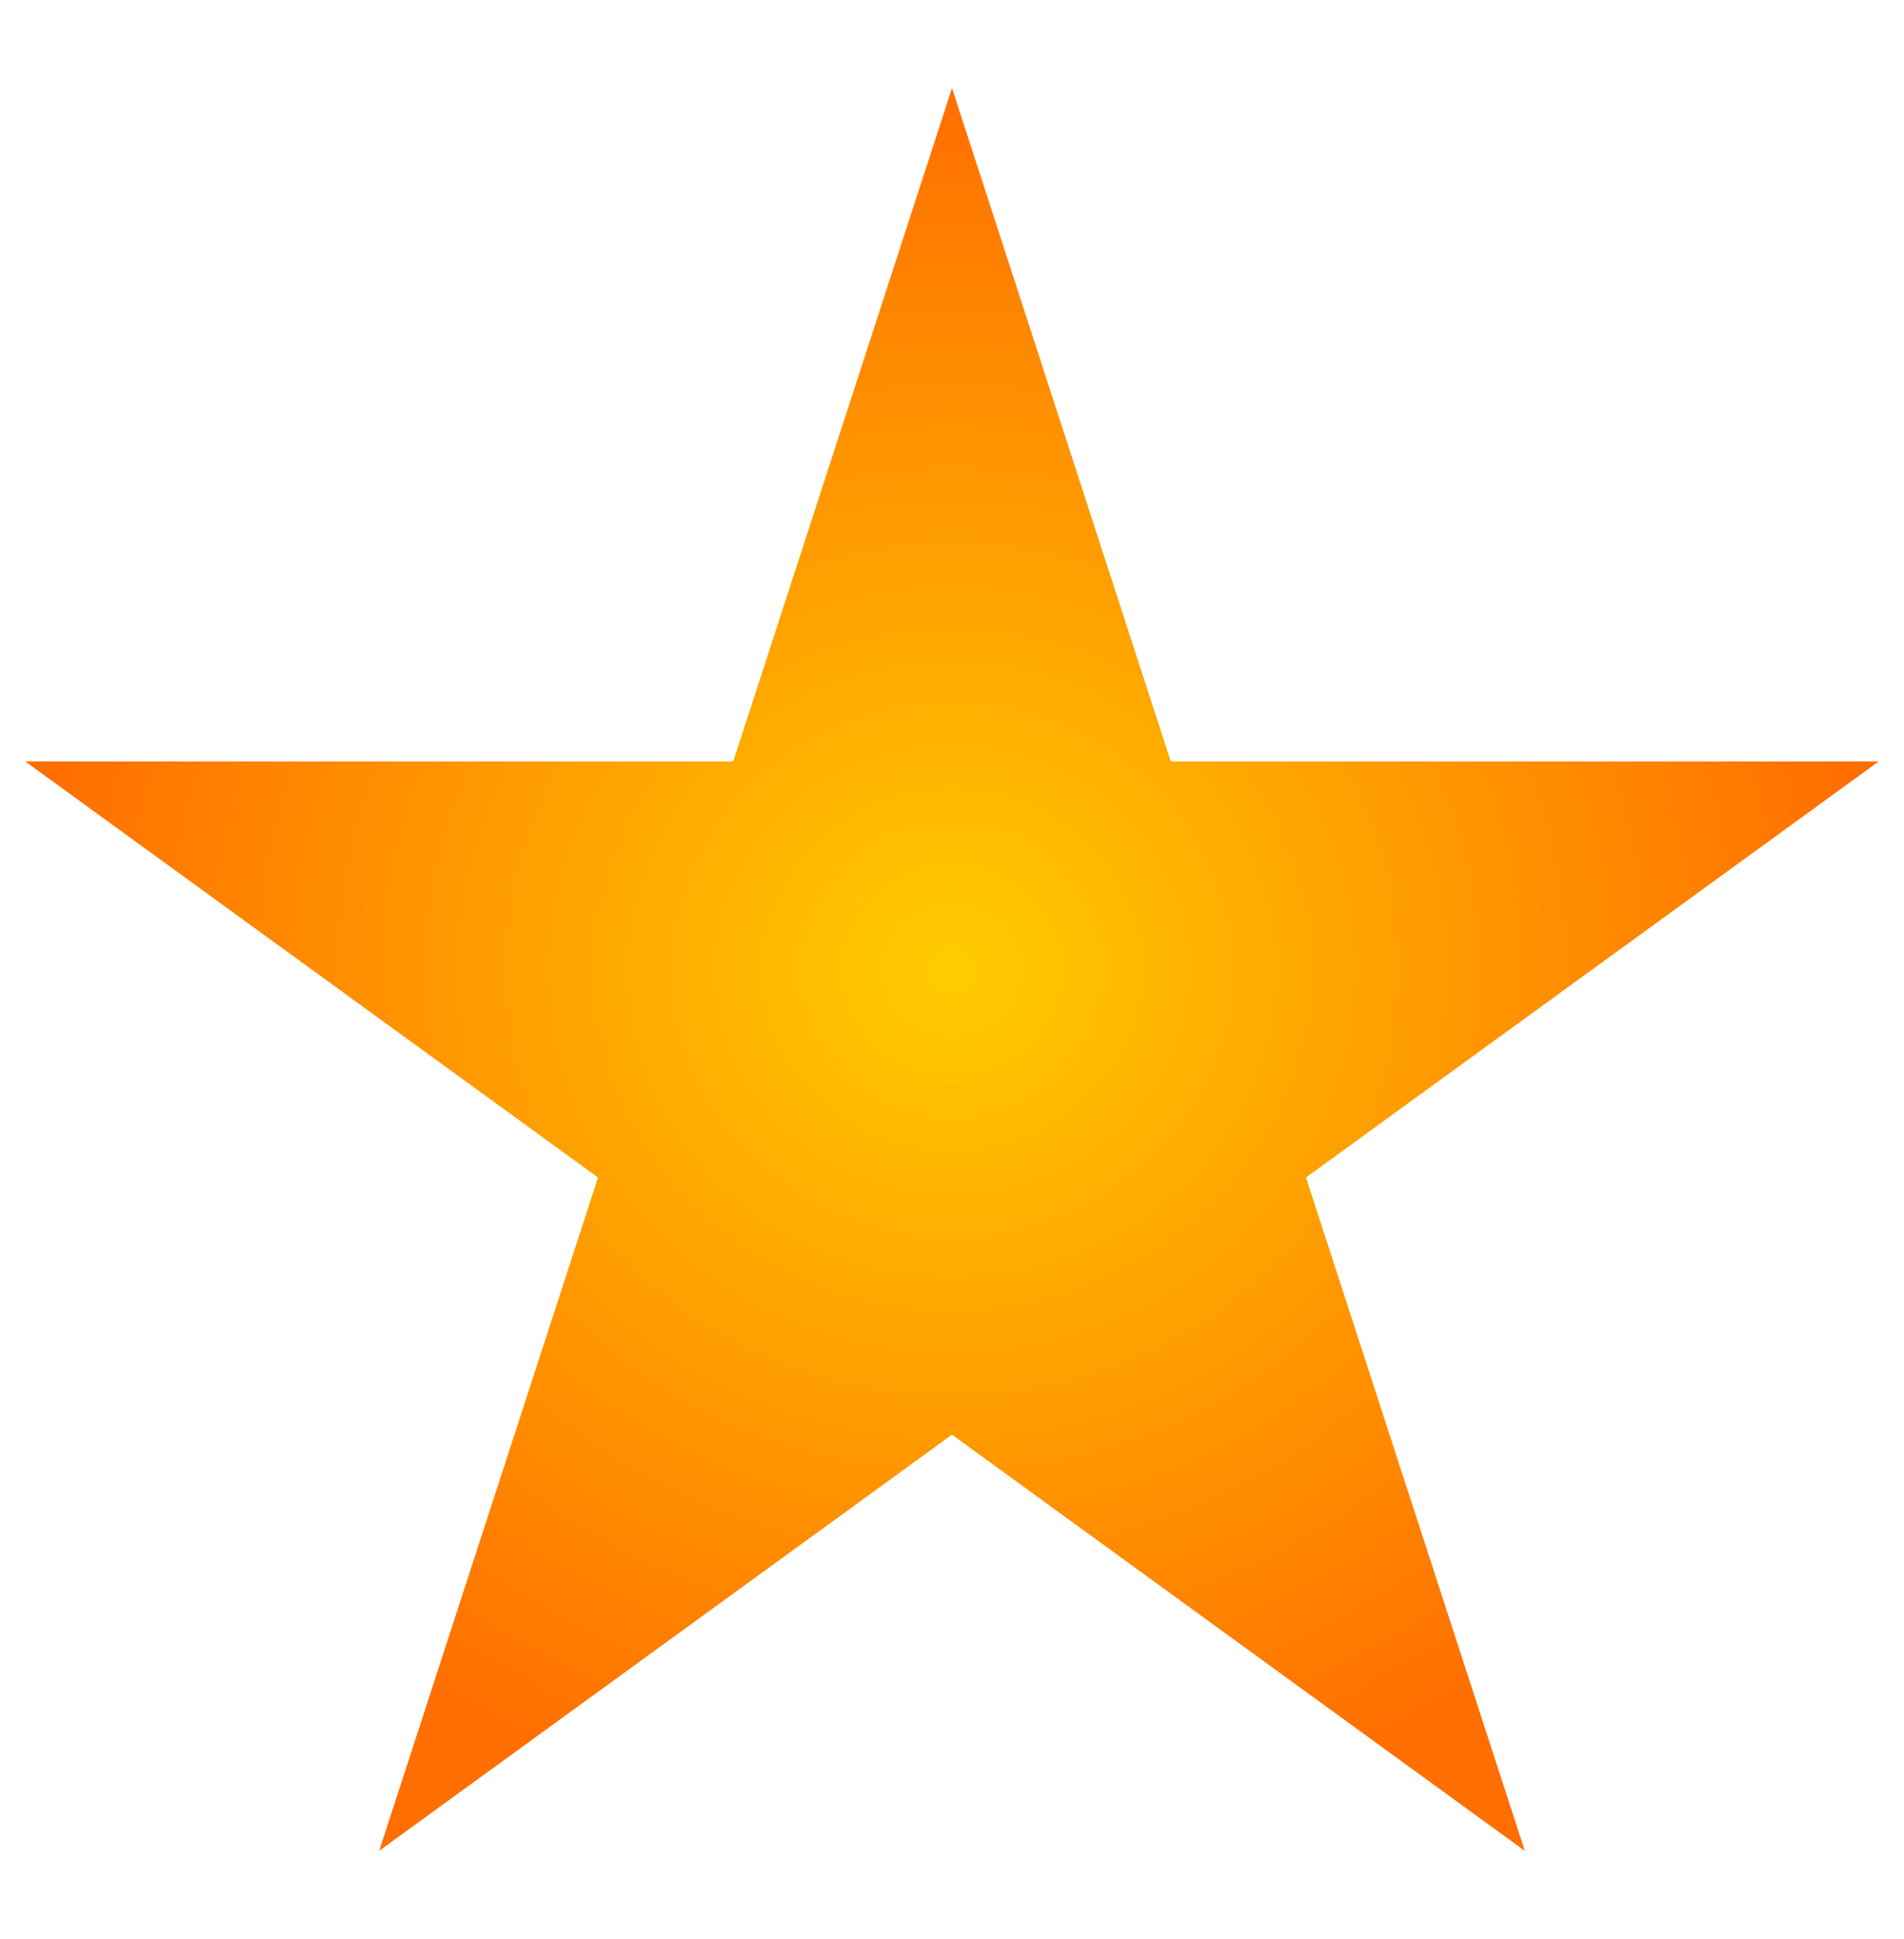 Free 5 Point Star Png, Download Free Clip Art, Free Clip Art.